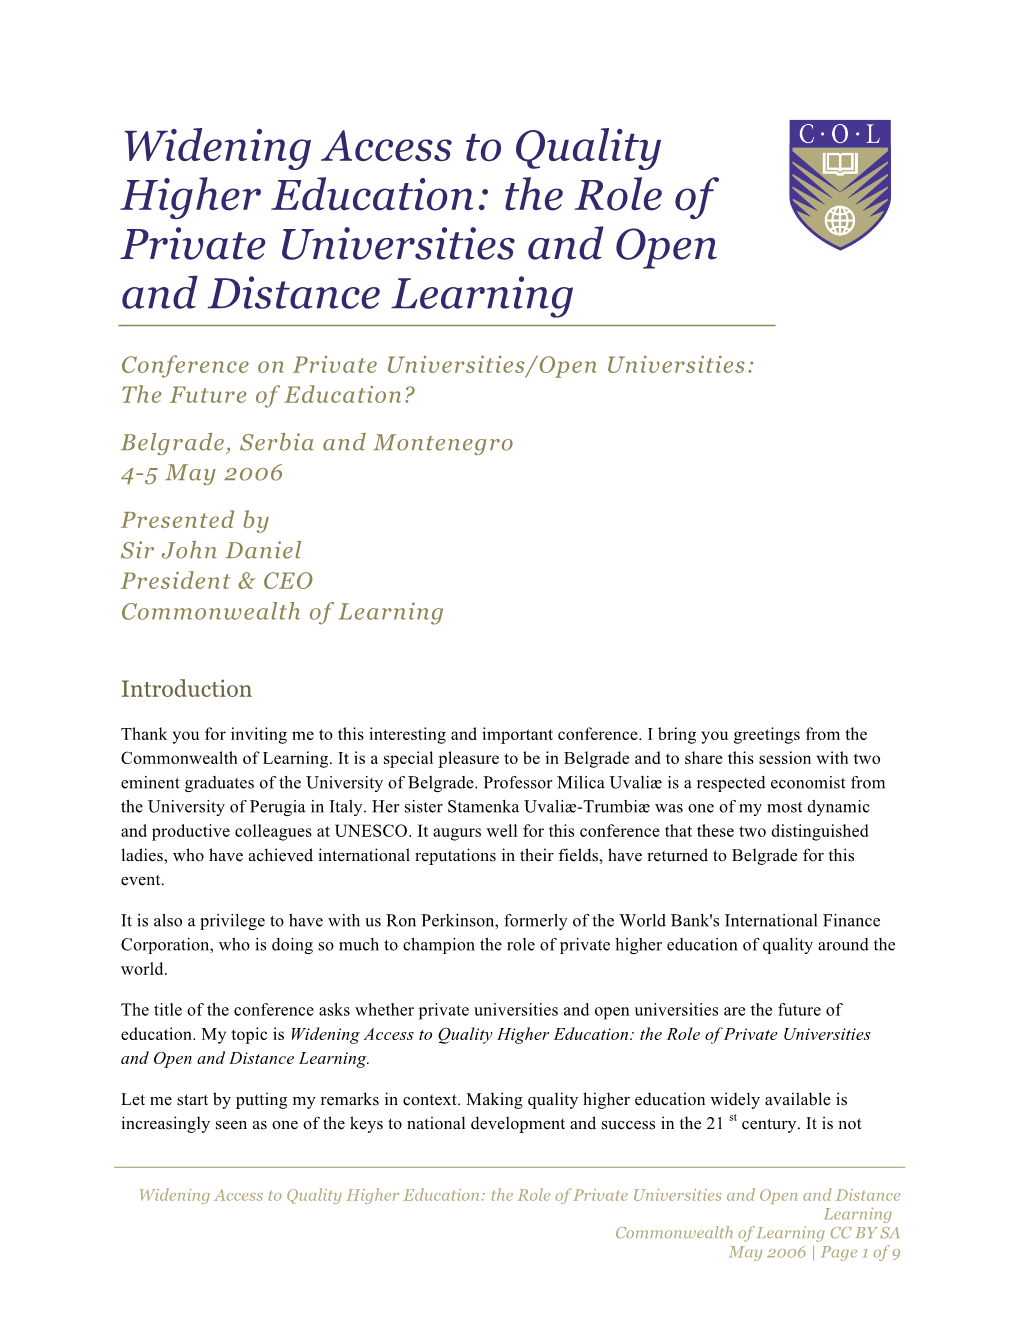 Widening Access to Quality Higher Education: the Role of Private Universities and Open and Distance Learning